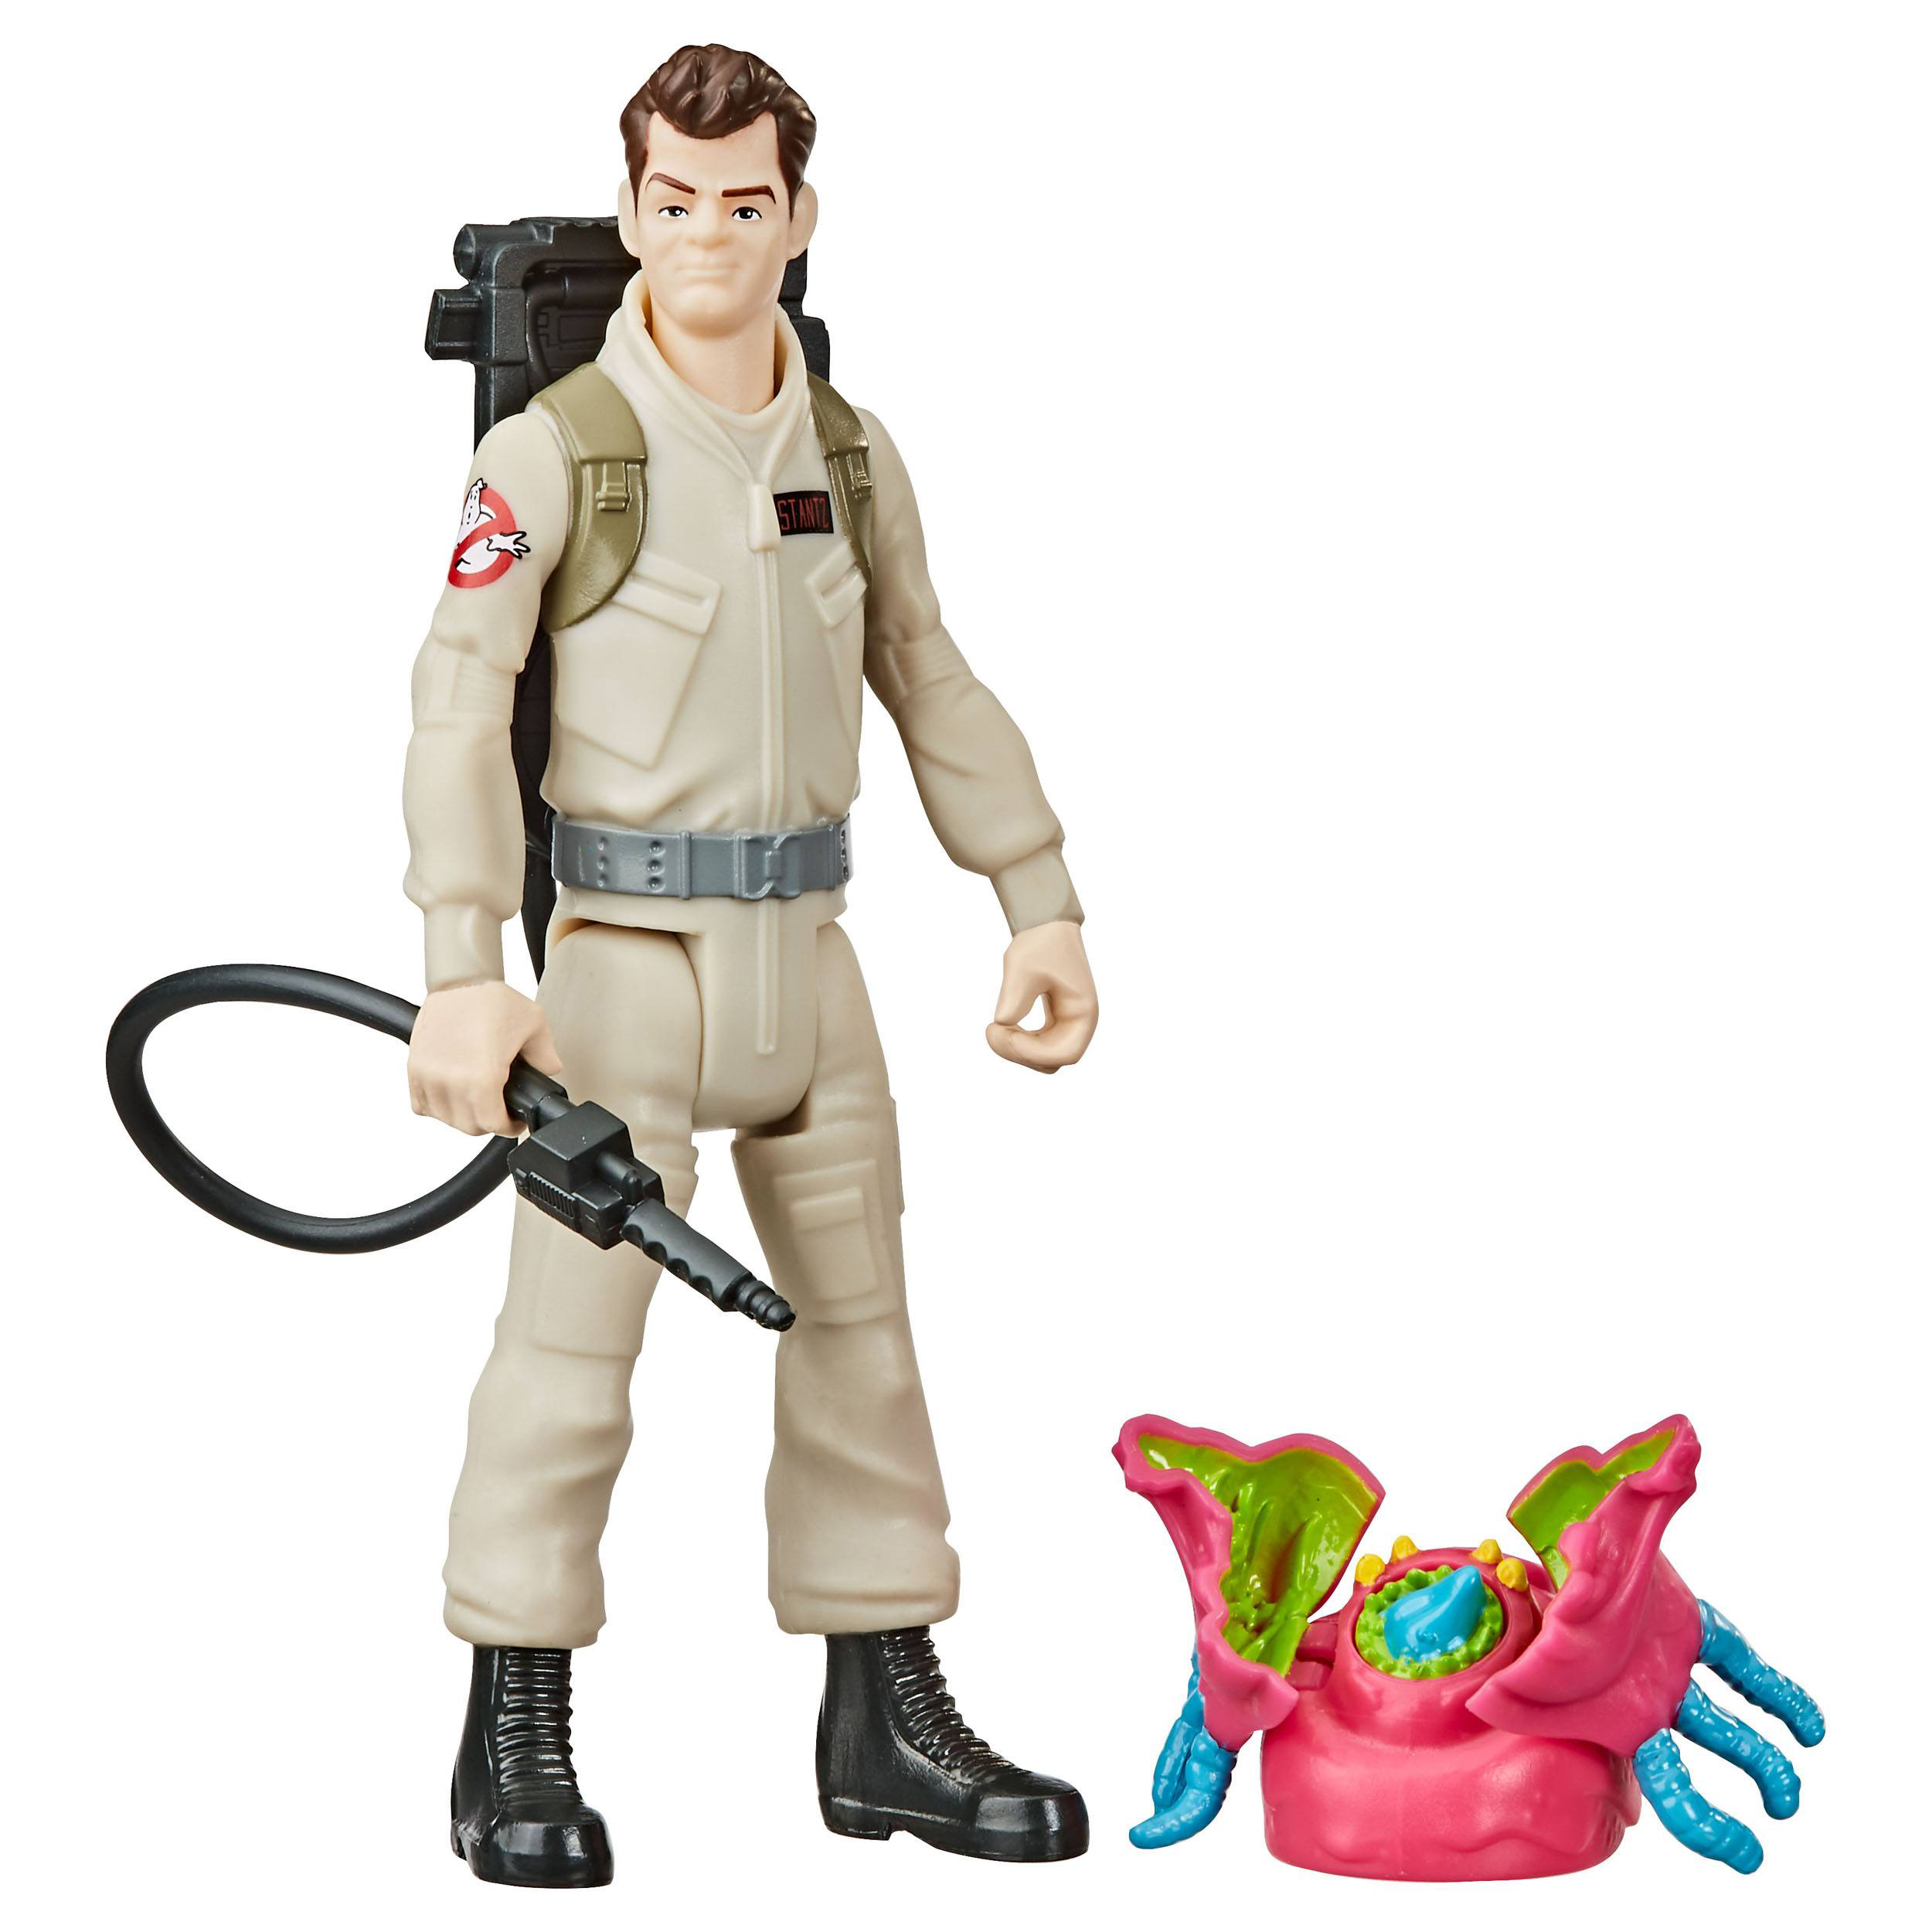 Fright 13 Geisterschreck Feature Ghostbusters Actionfigur F9765 | Action Figur: HASBRO Stantz cm Ray